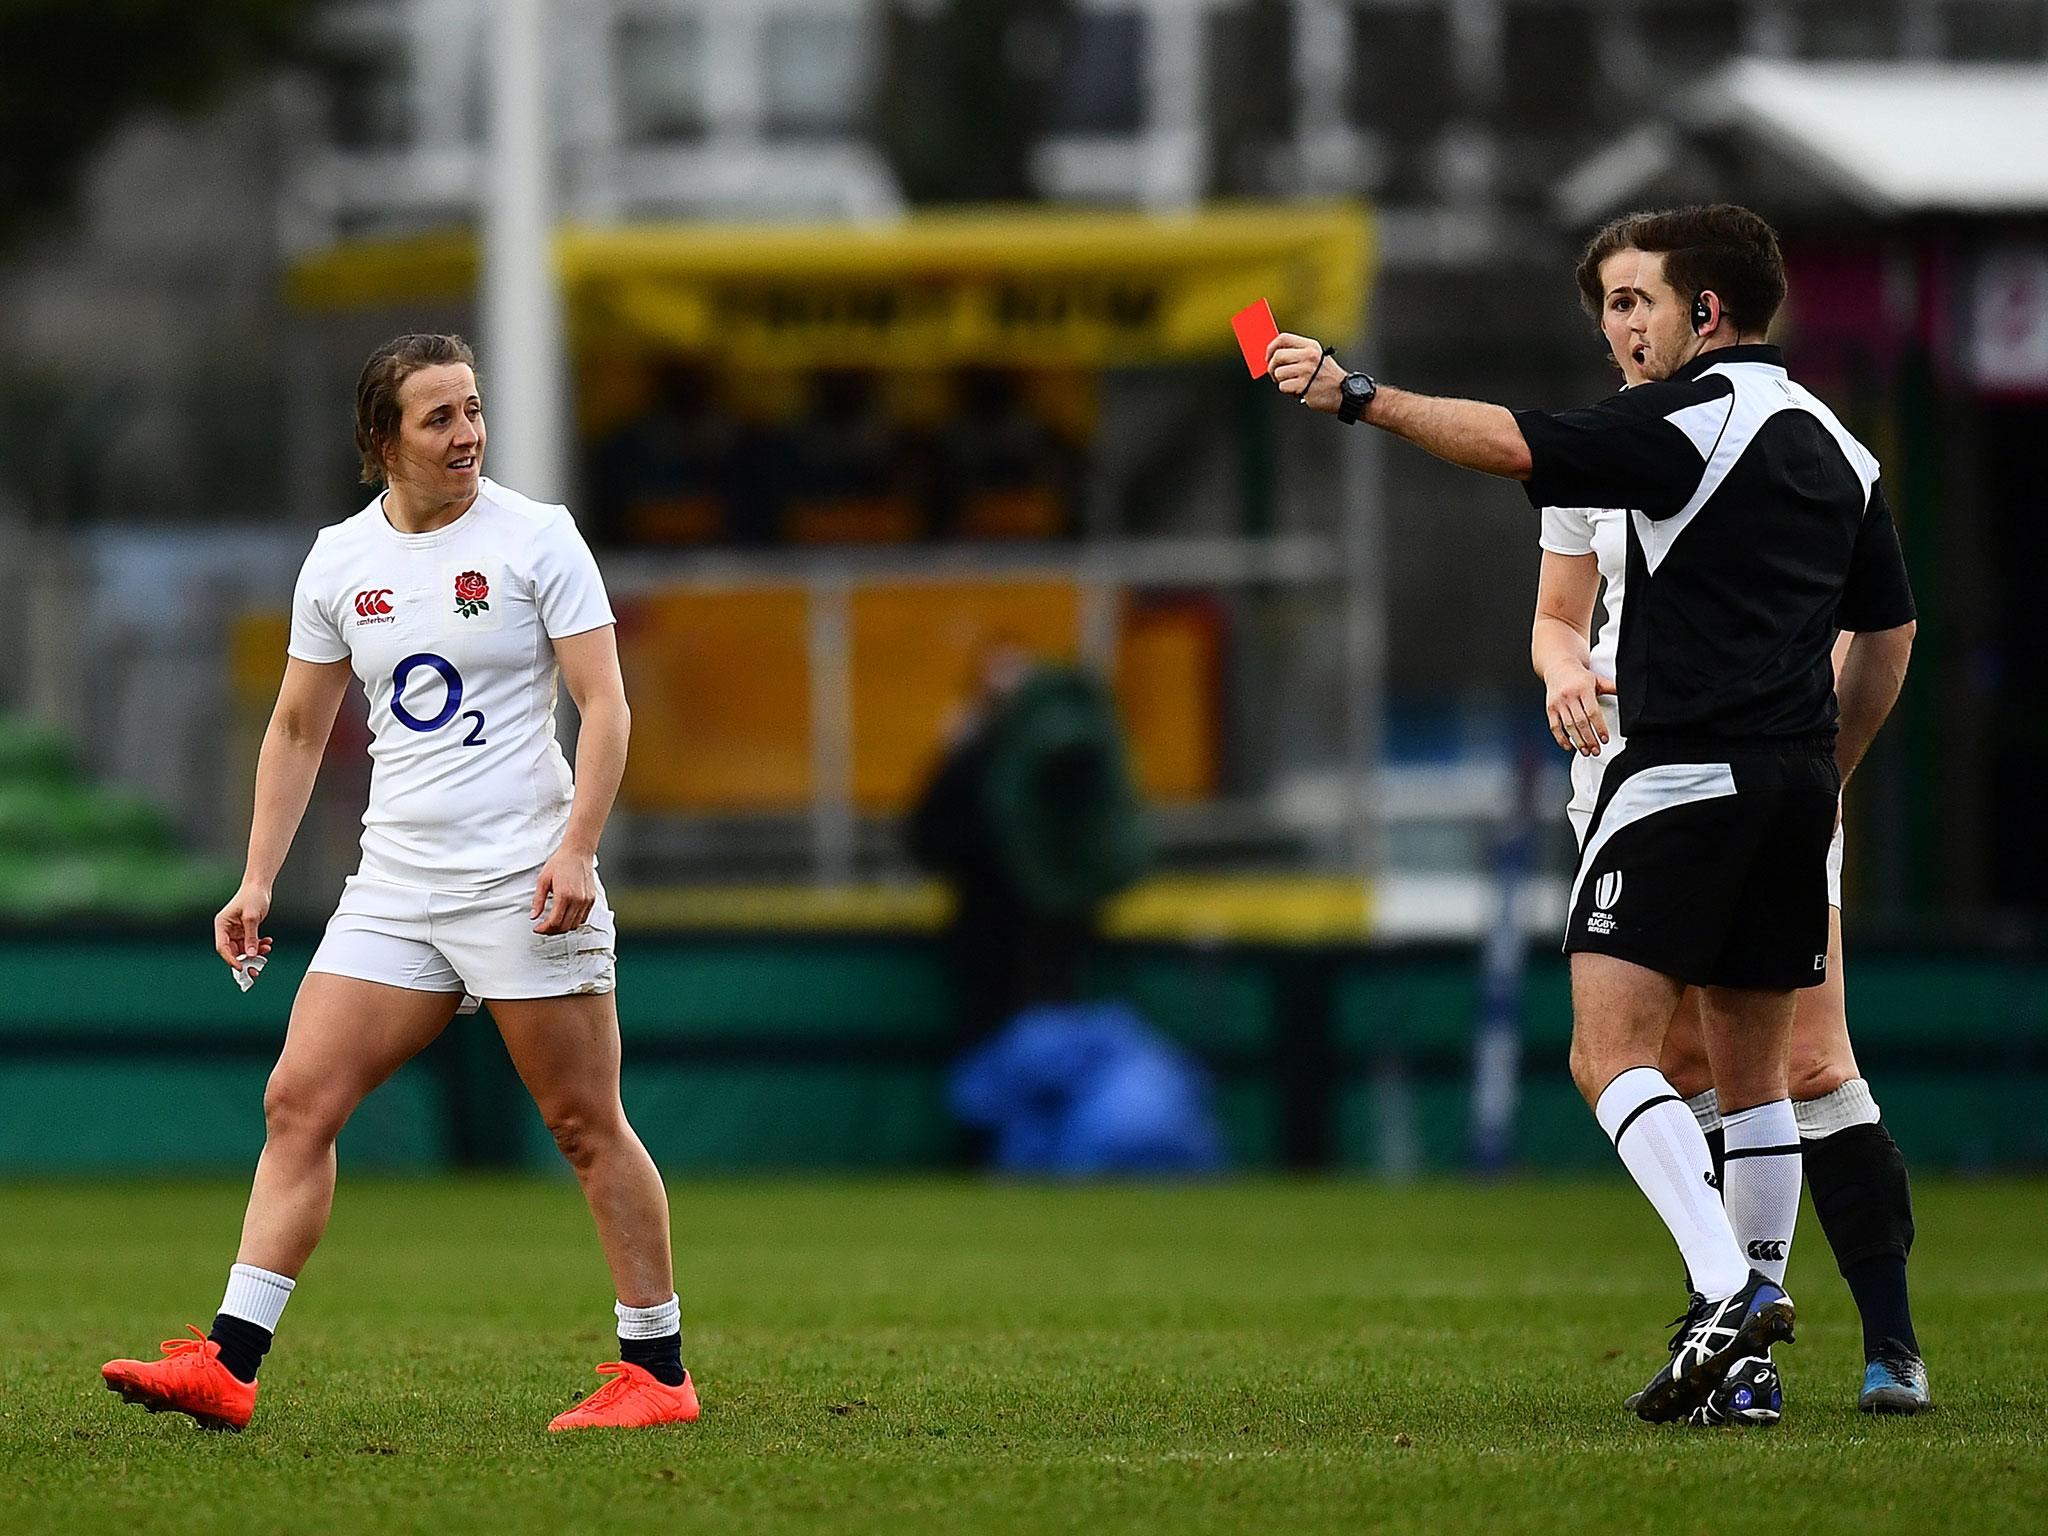 Katy Mclean was shown a straight red card for a dangerous tackle